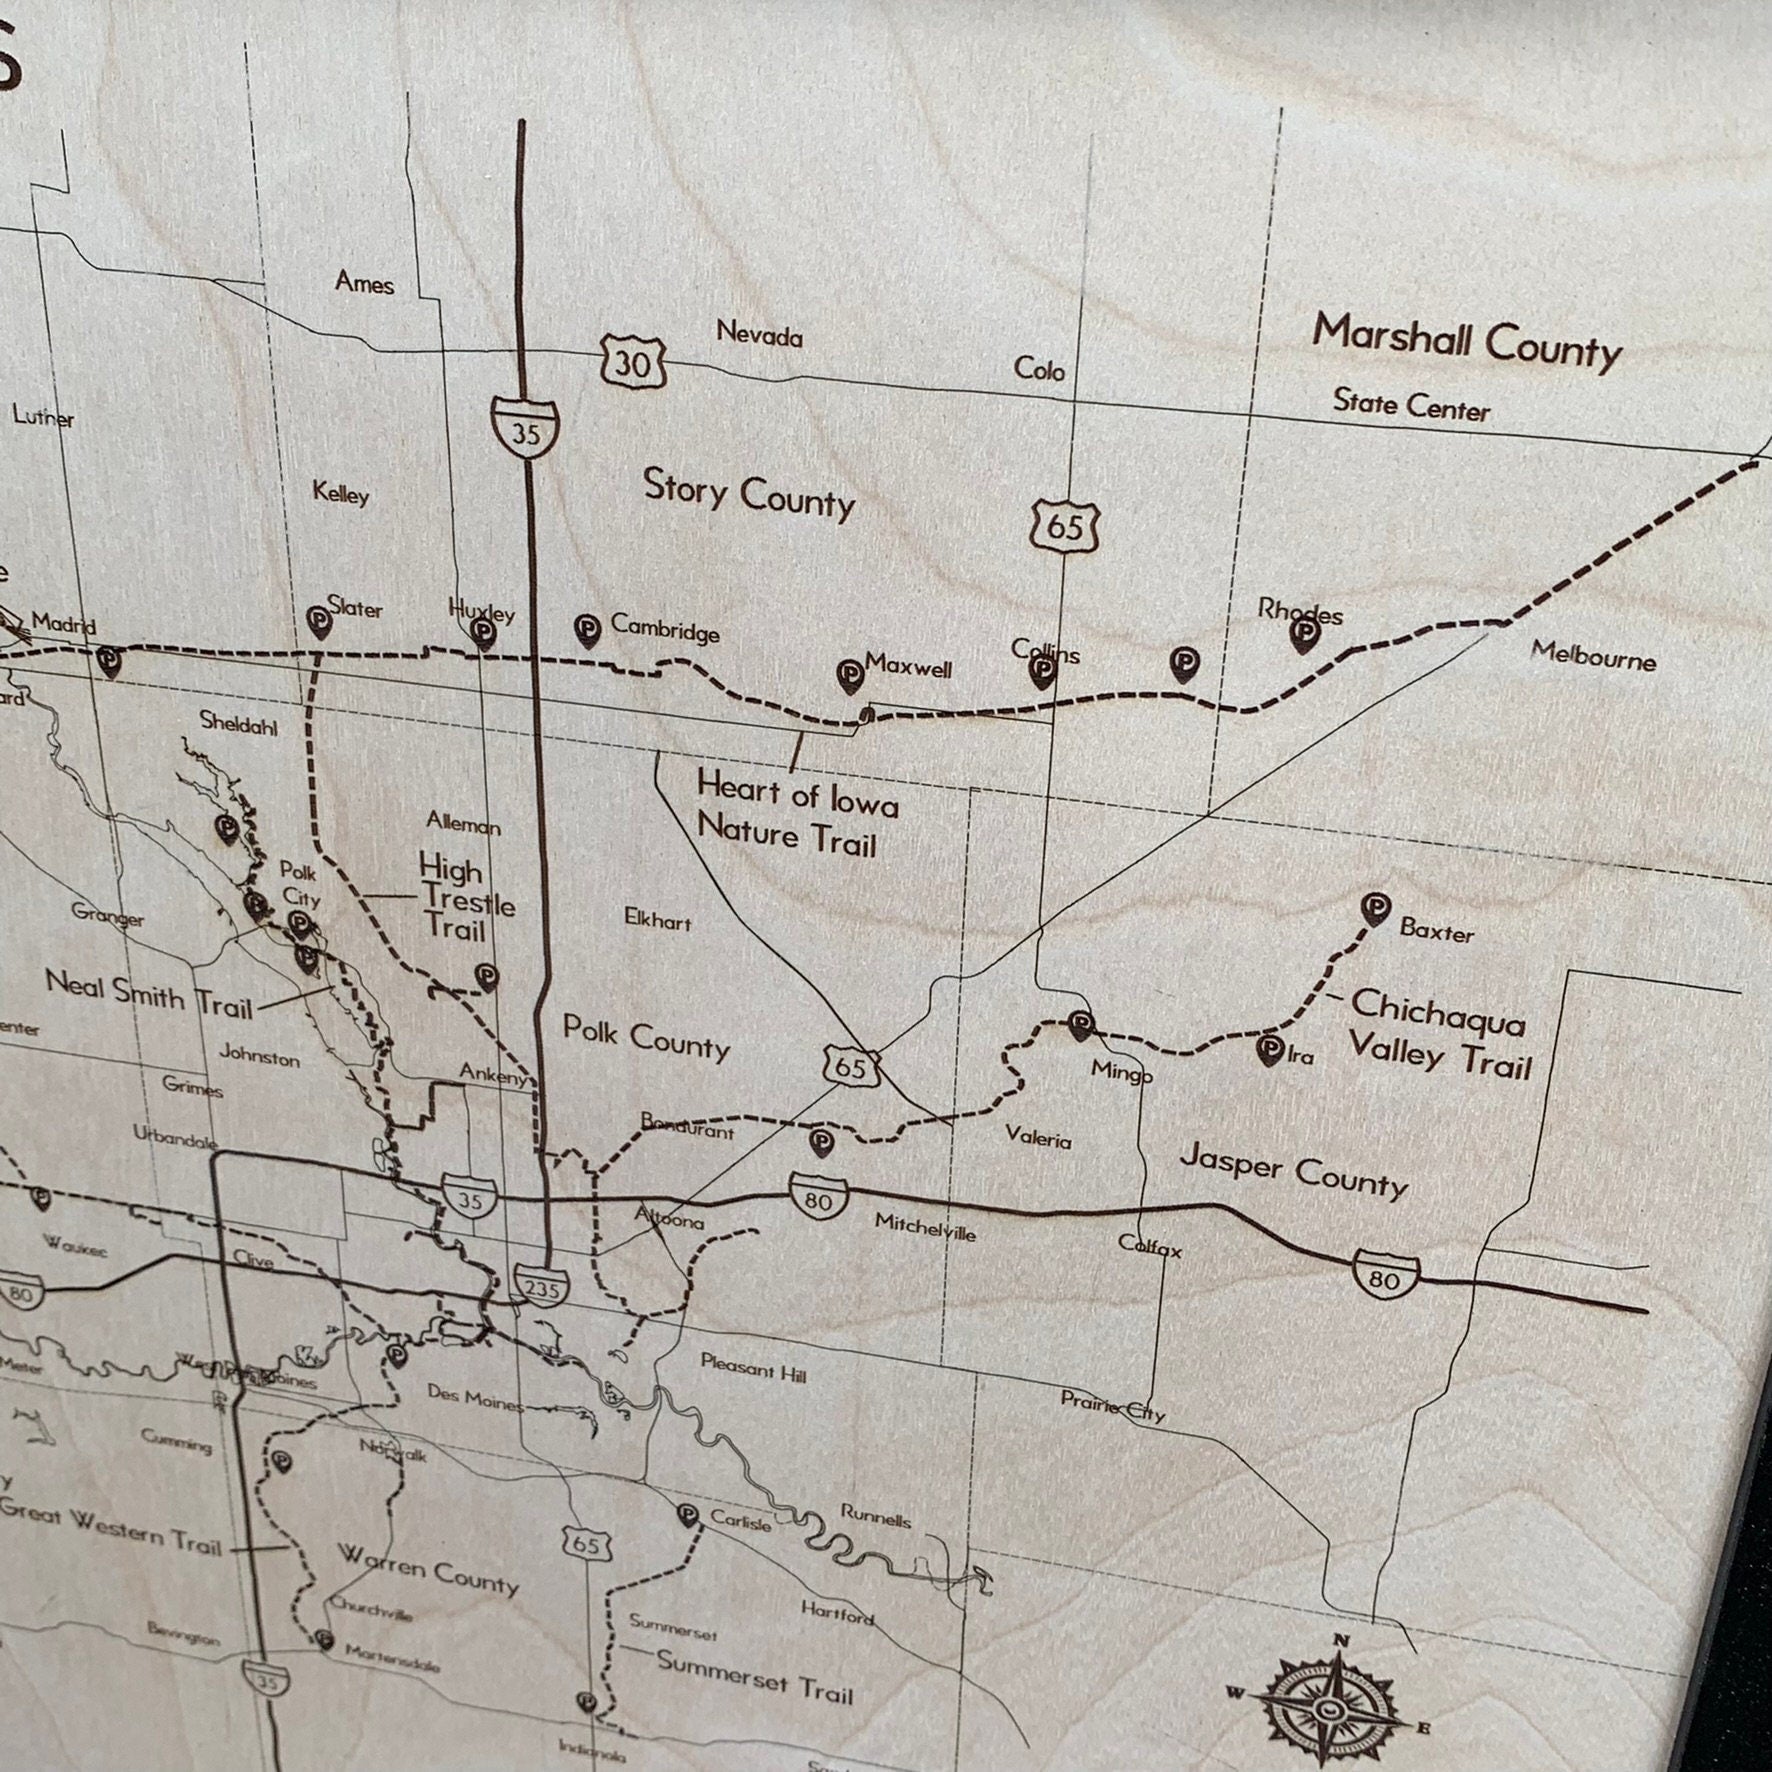 Central Iowa Bike Trails Map - Laser Engraved Wall Hanging